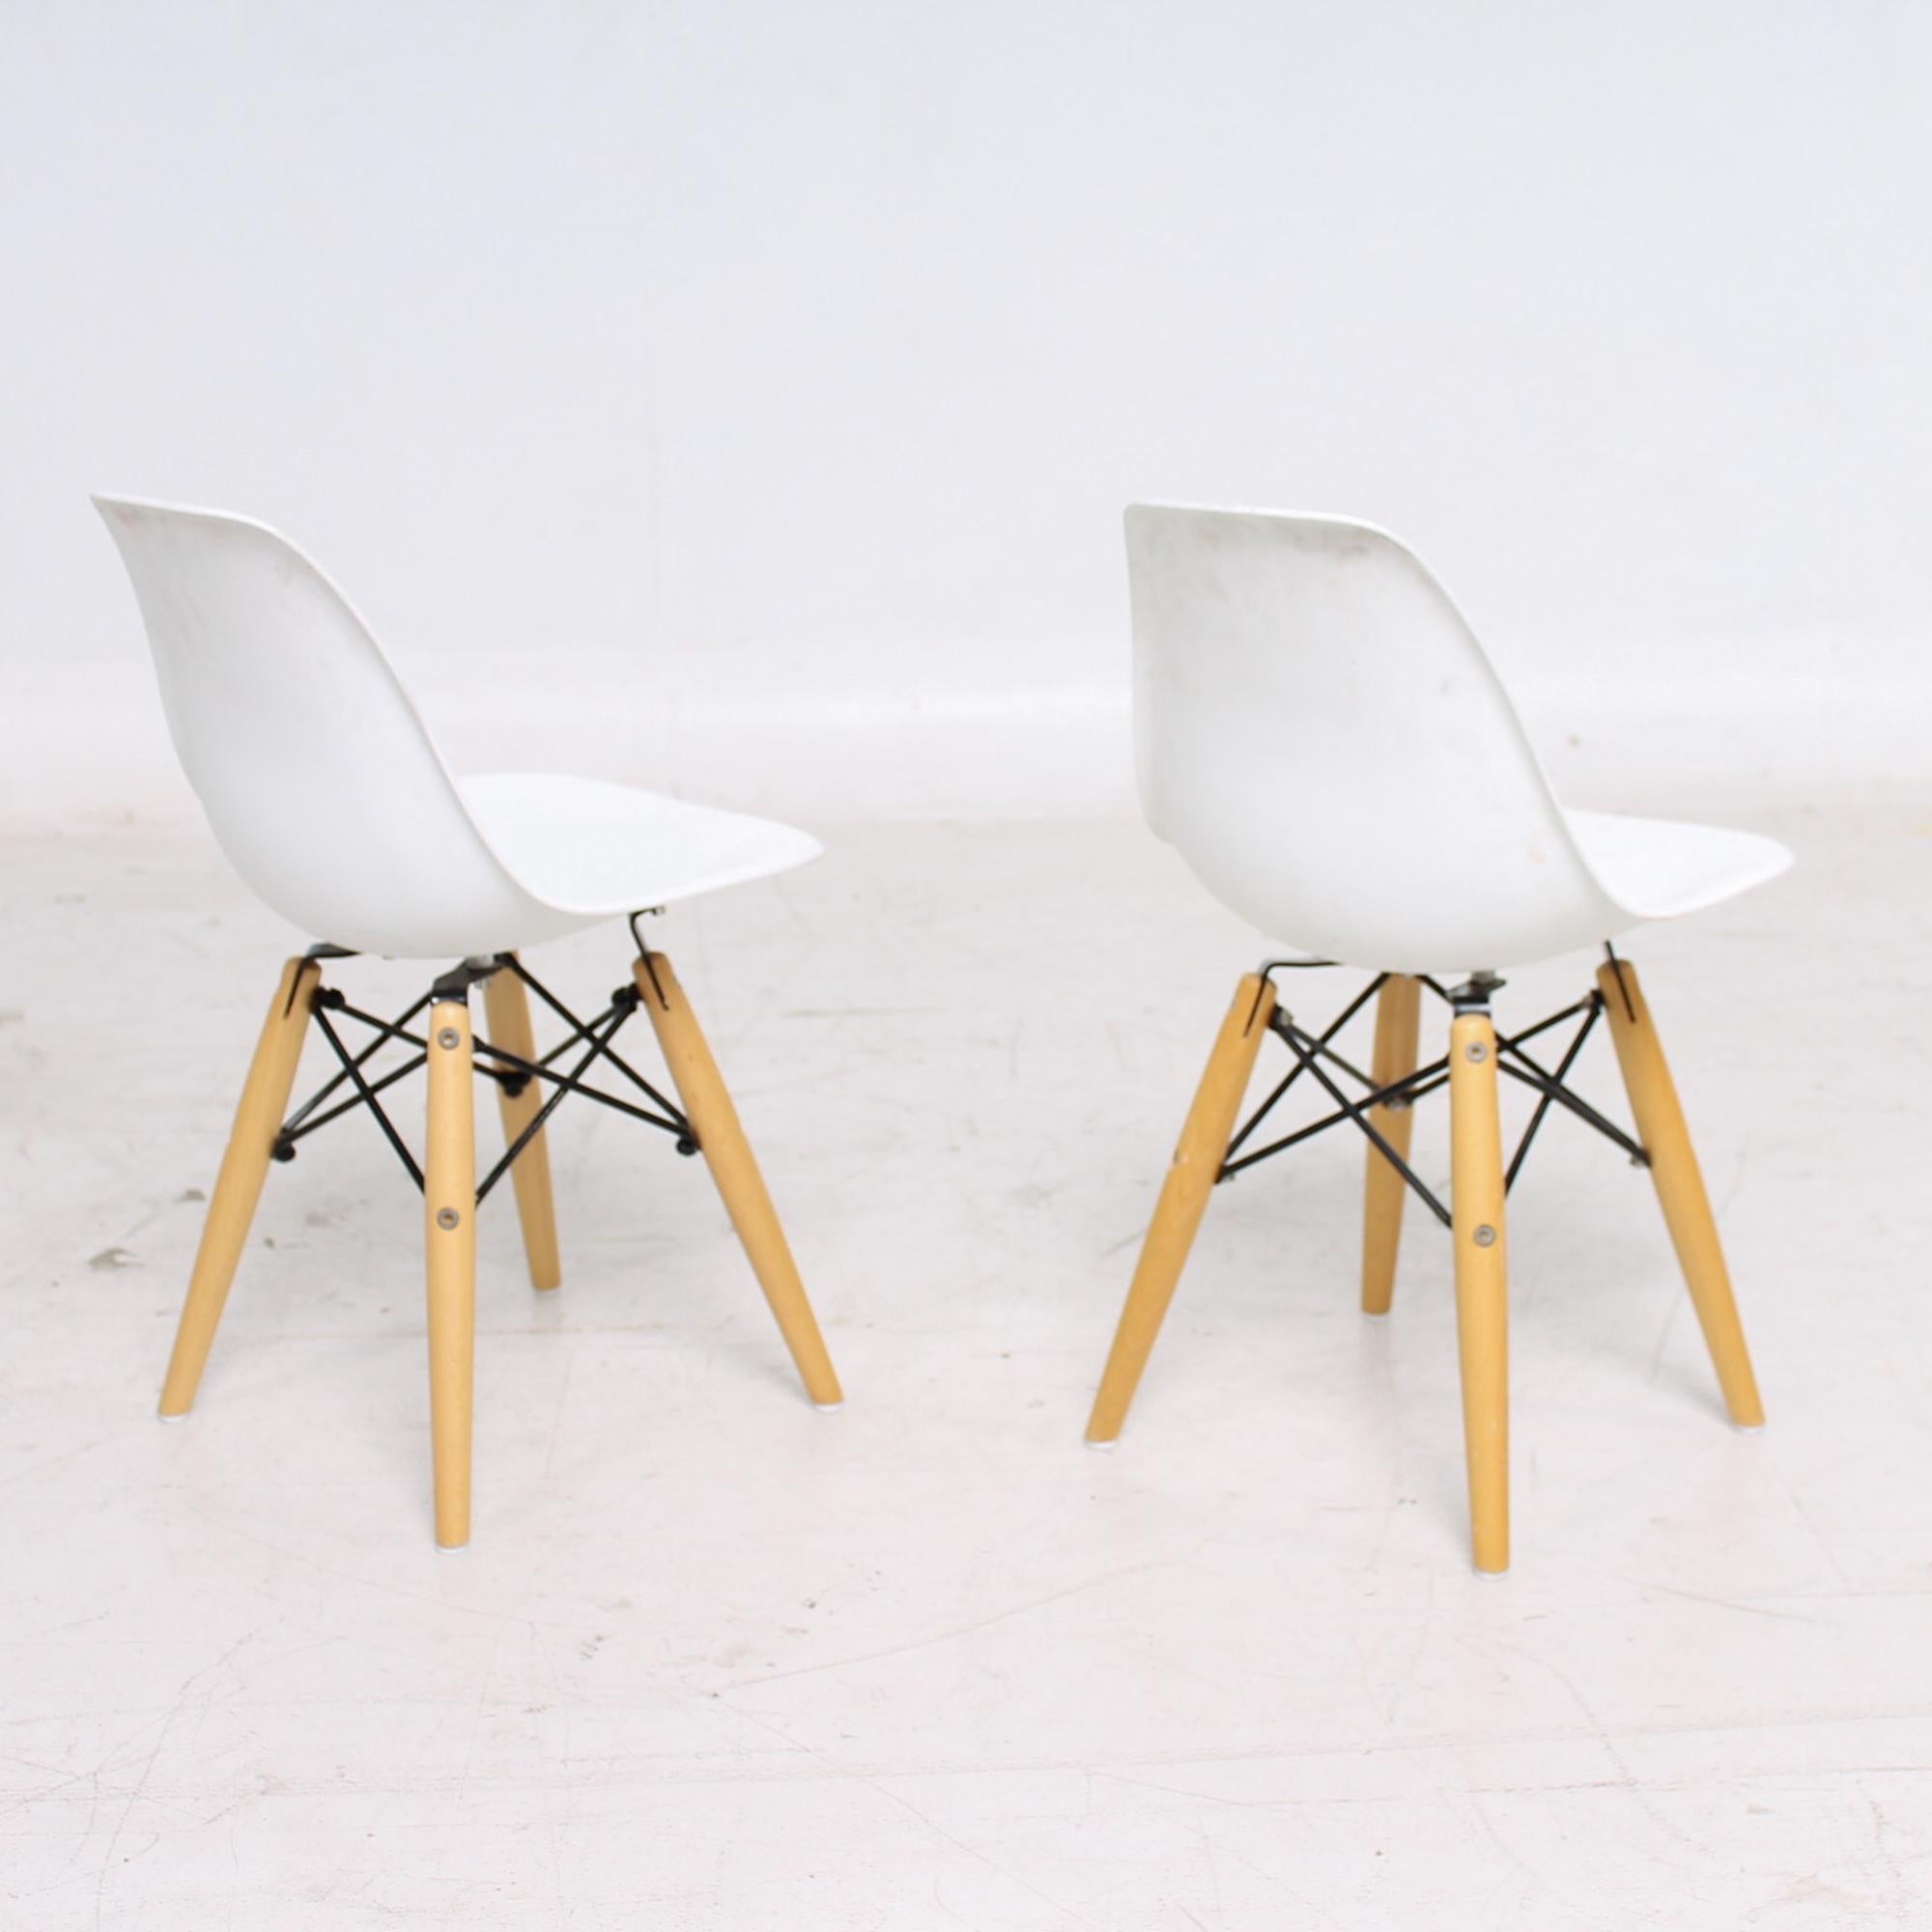 Classic Eames Modern fun Eiffel Tower kiddie kids chairs in molded white plastic with wood legs
iconic design 1950 of Charles and Ray Eames
Listing is for 2 chairs Children Toddler Kids Day School Activity use.
Dimensions: 21.75 H x 12.25